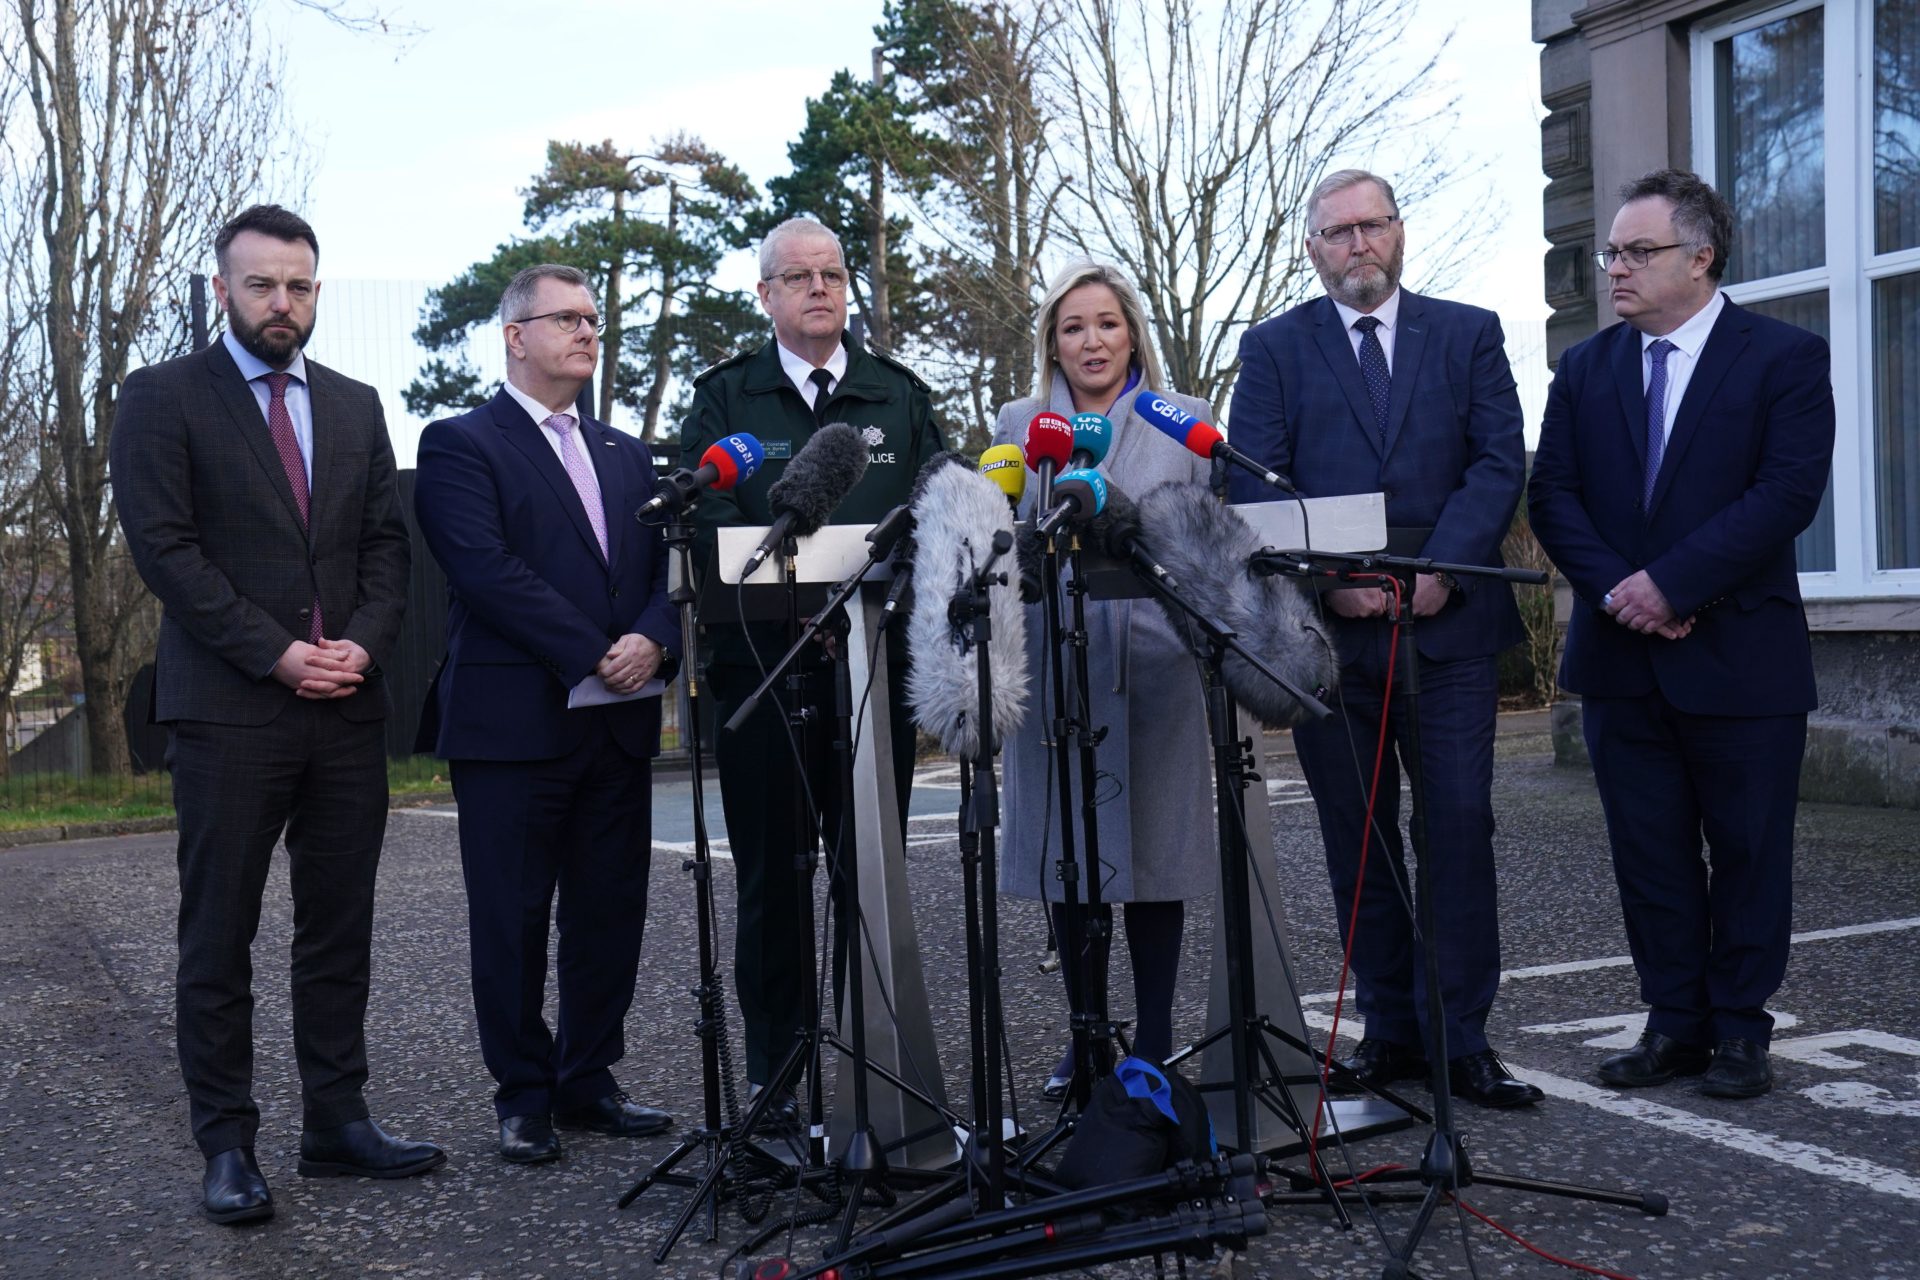 (Left to right) SDLP leader Colum Eastwood, DUP leader Jeffrey Donaldson, PSNI Chief Constable Simon Byrne, Sinn Fein deputy leader Michelle O'Neill, UUP leader Doug Beattie, and Alliance party member Stephen Farry speaking to the media outside PSNI HQ in Belfast, Northern Ireland. 